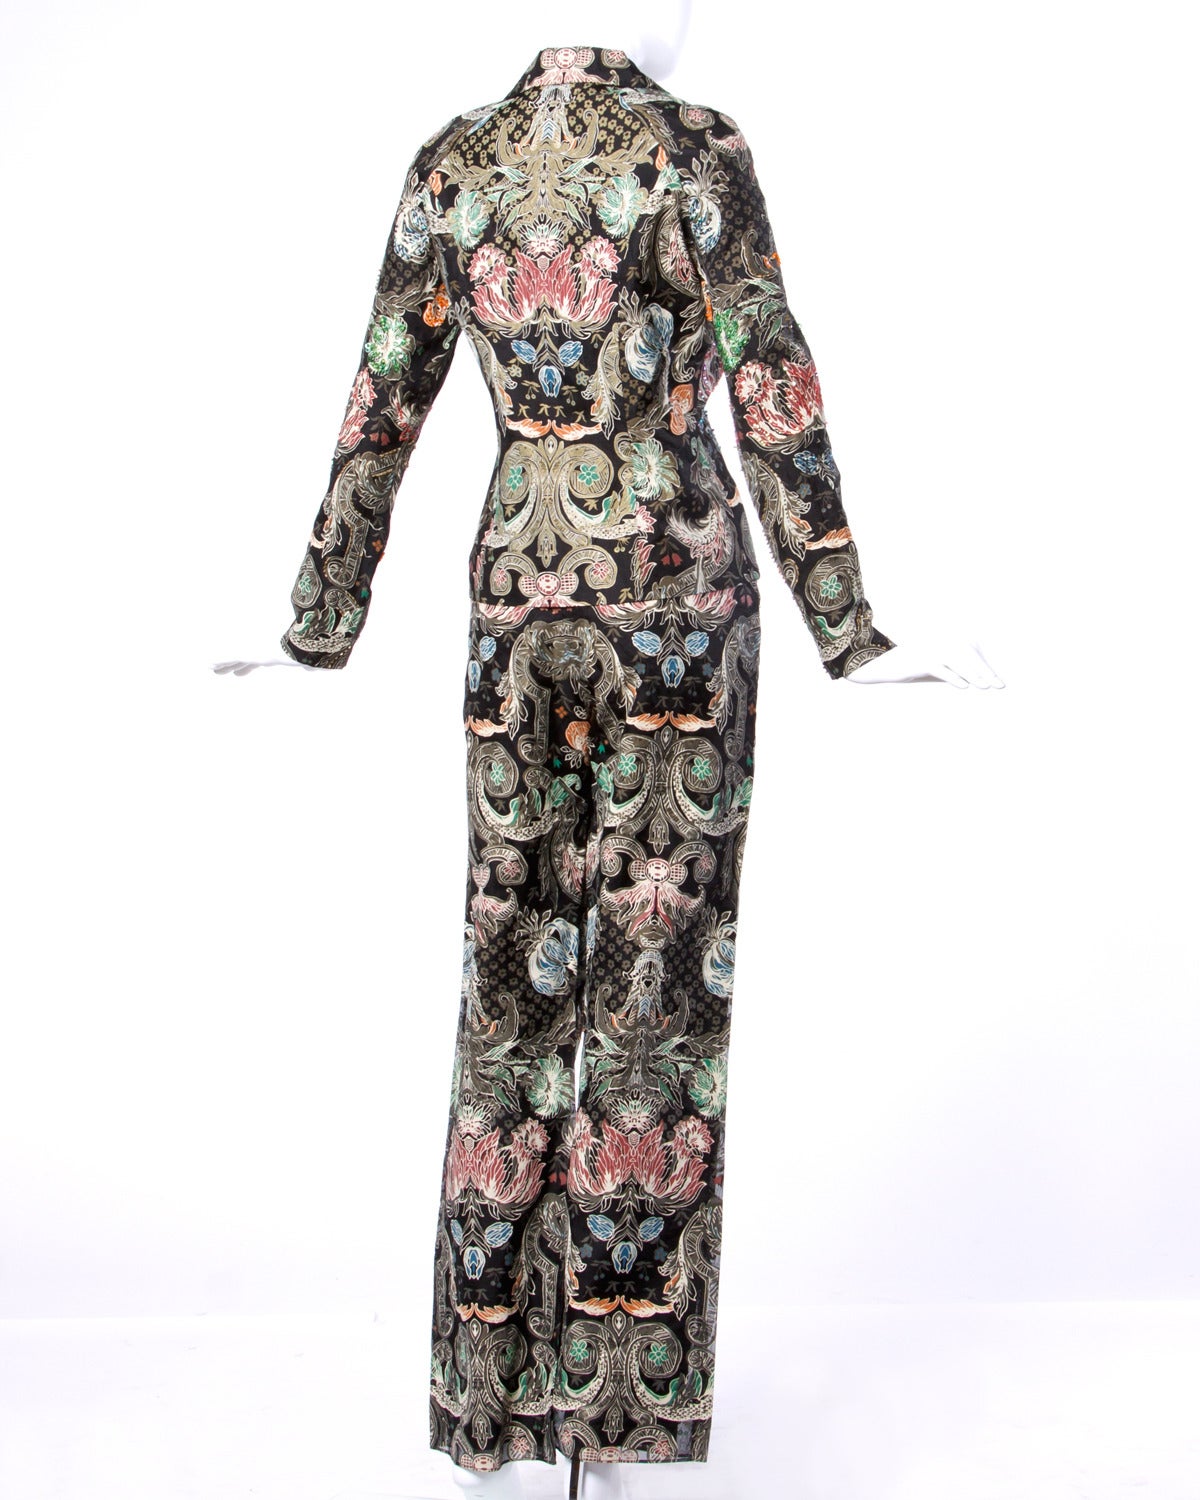 Gorgeous colorful screen printed silk 2-piece pants suit embellished with sequins and beads. Both pieces can be worn together or separately!

Details:

Fully Lined
Shoulder Pads Sewn Into Lining
Front Button Closure On Top/ Side Zip Hook